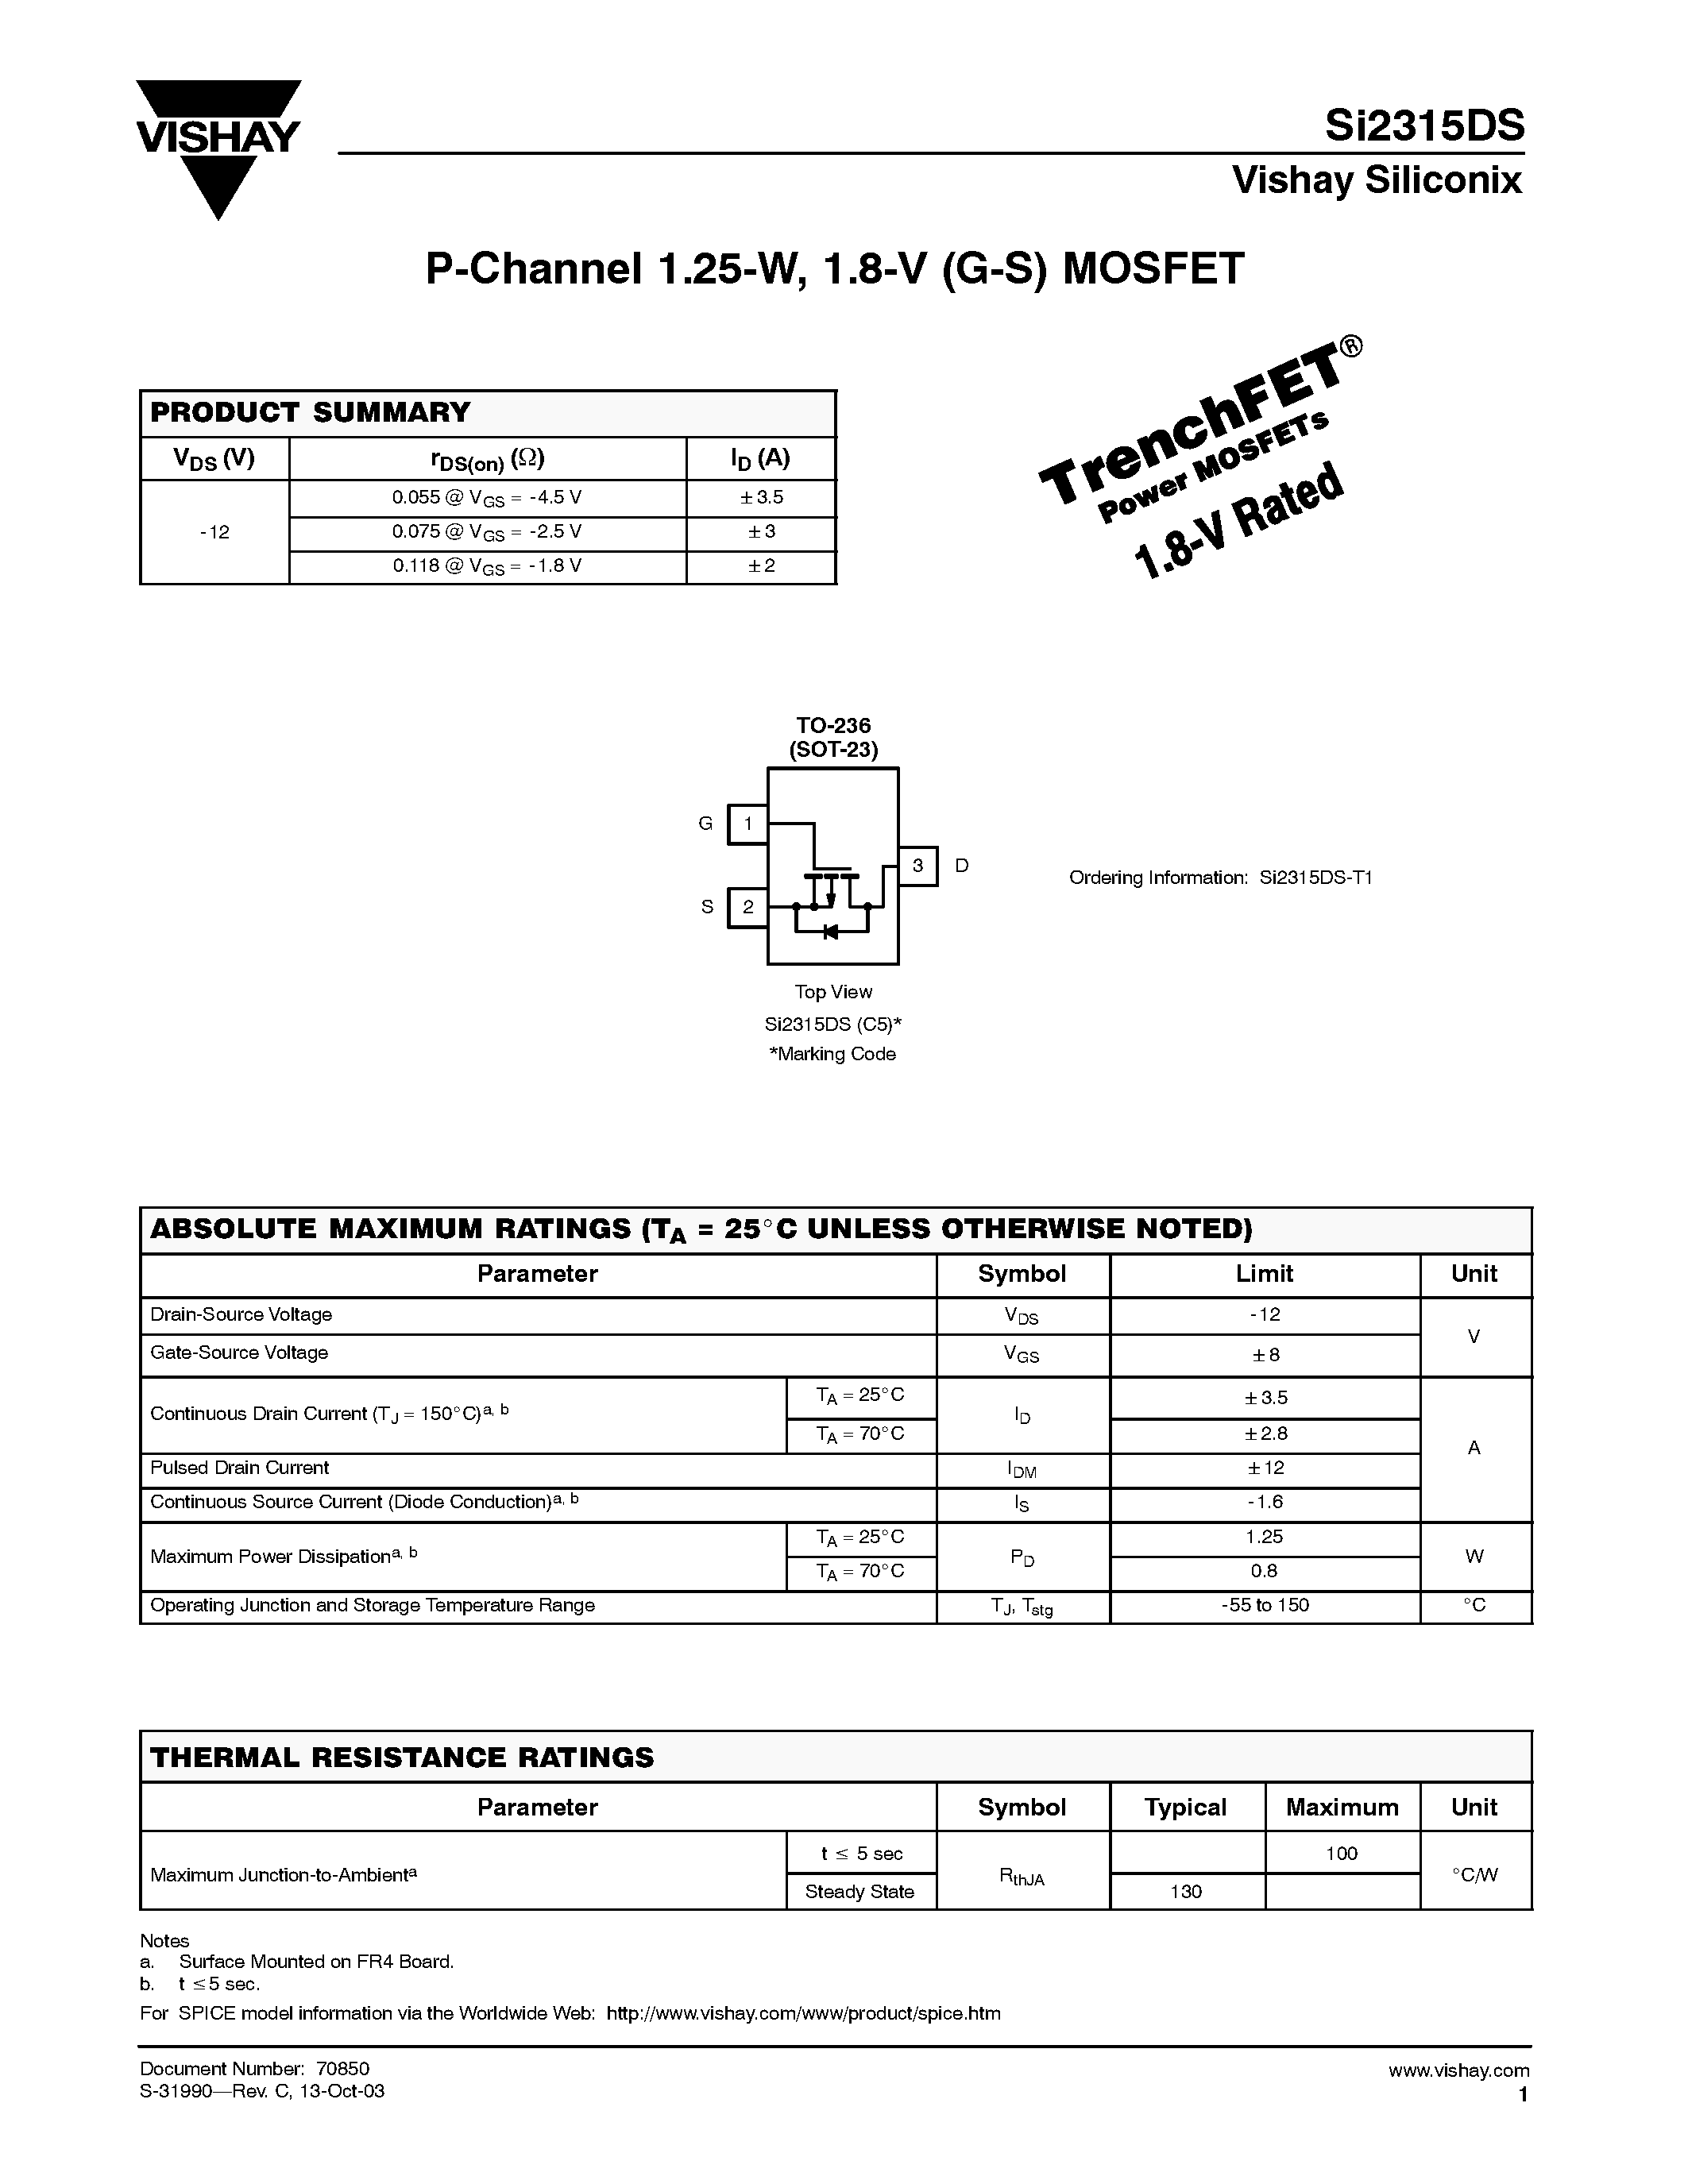 Datasheet Si2315DS-T1 - P-Channel 1.25-W/ 1.8-V (G-S) MOSFET page 1